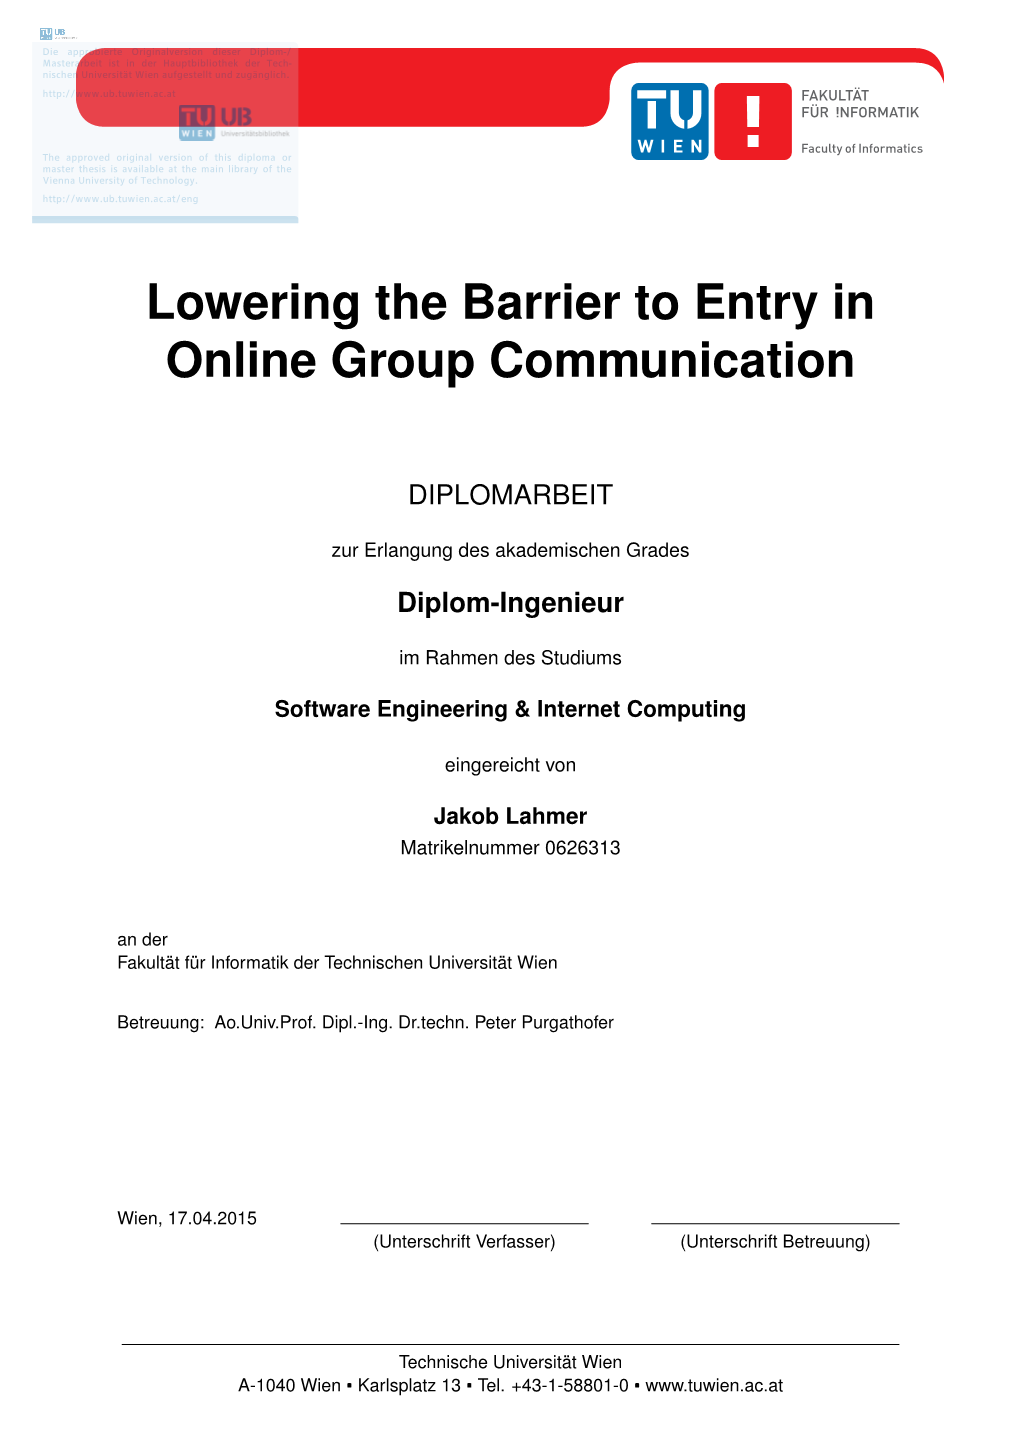 Lowering the Barrier to Entry in Online Group Communication